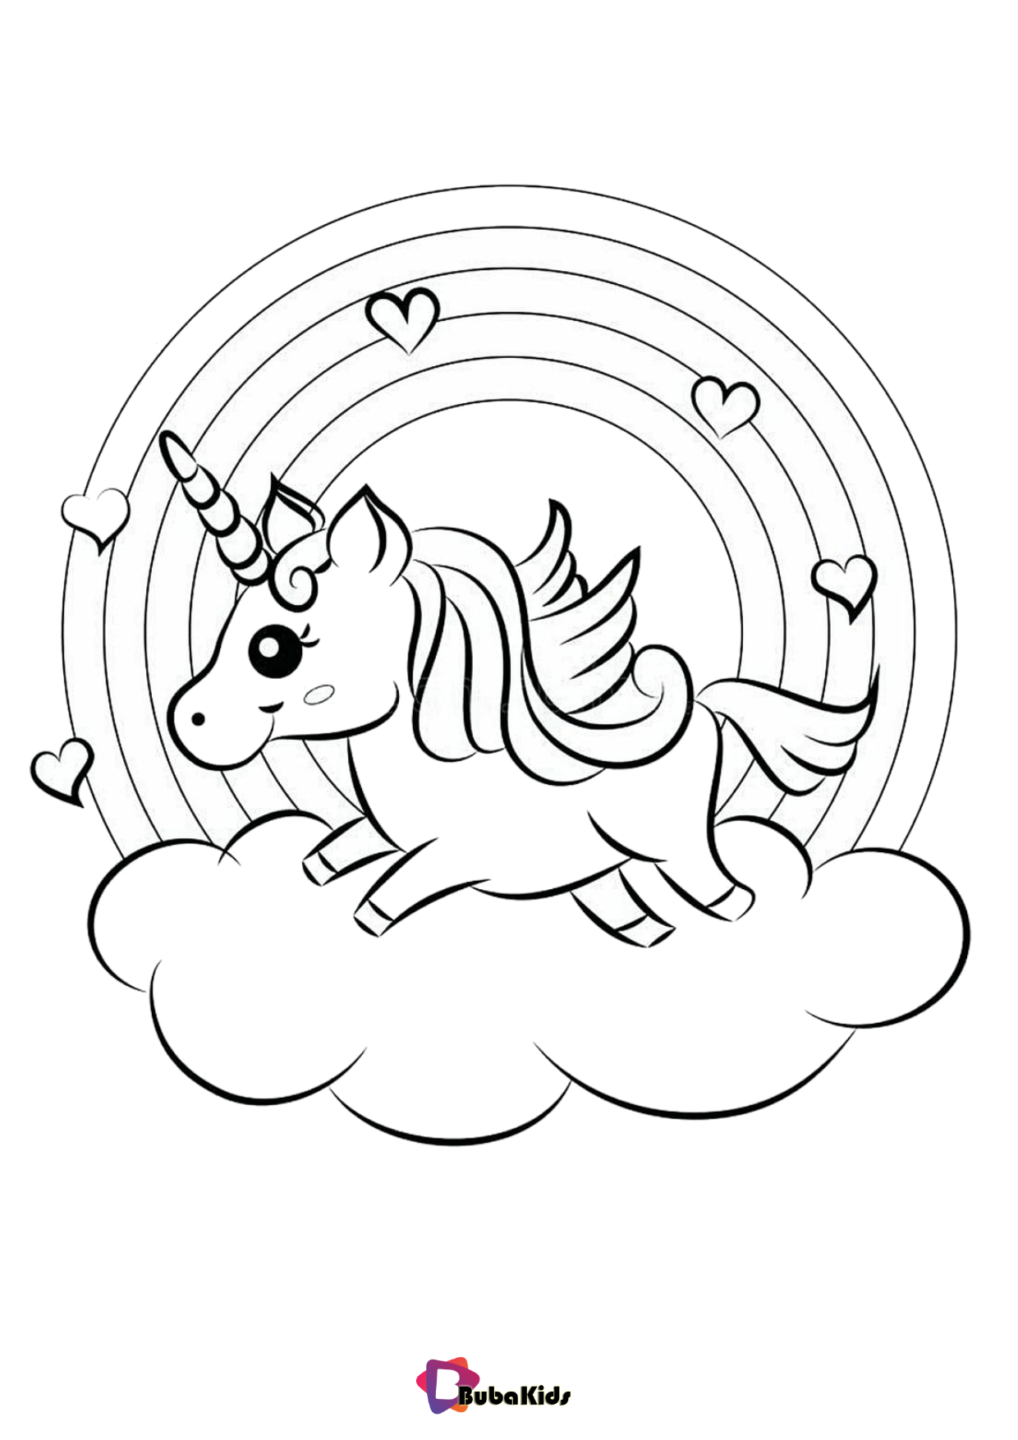 rainbow and unicorn with cloud coloring pages